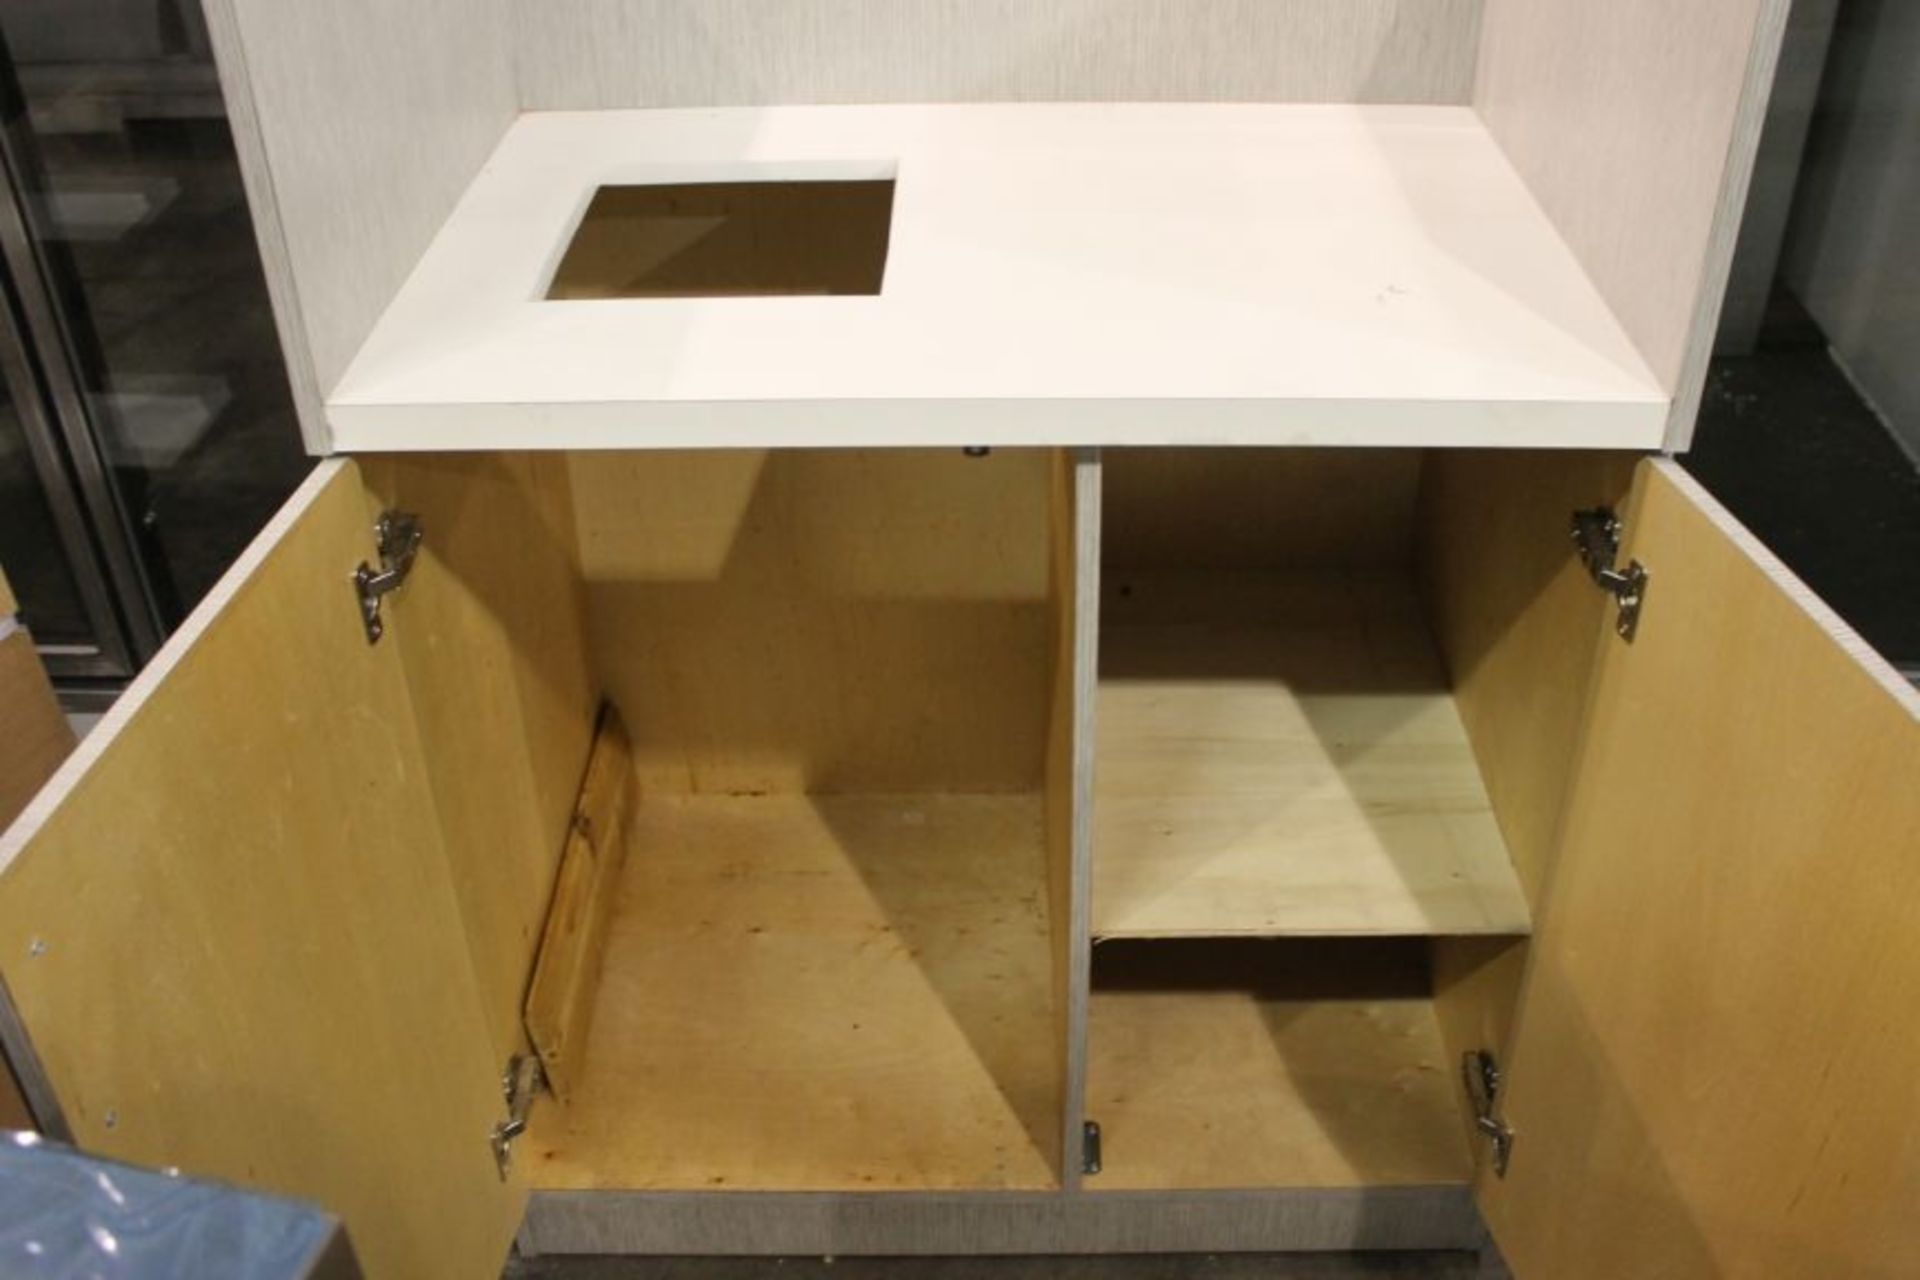 Millwork Waste Station - 36" x 24" x 48" - Image 3 of 3